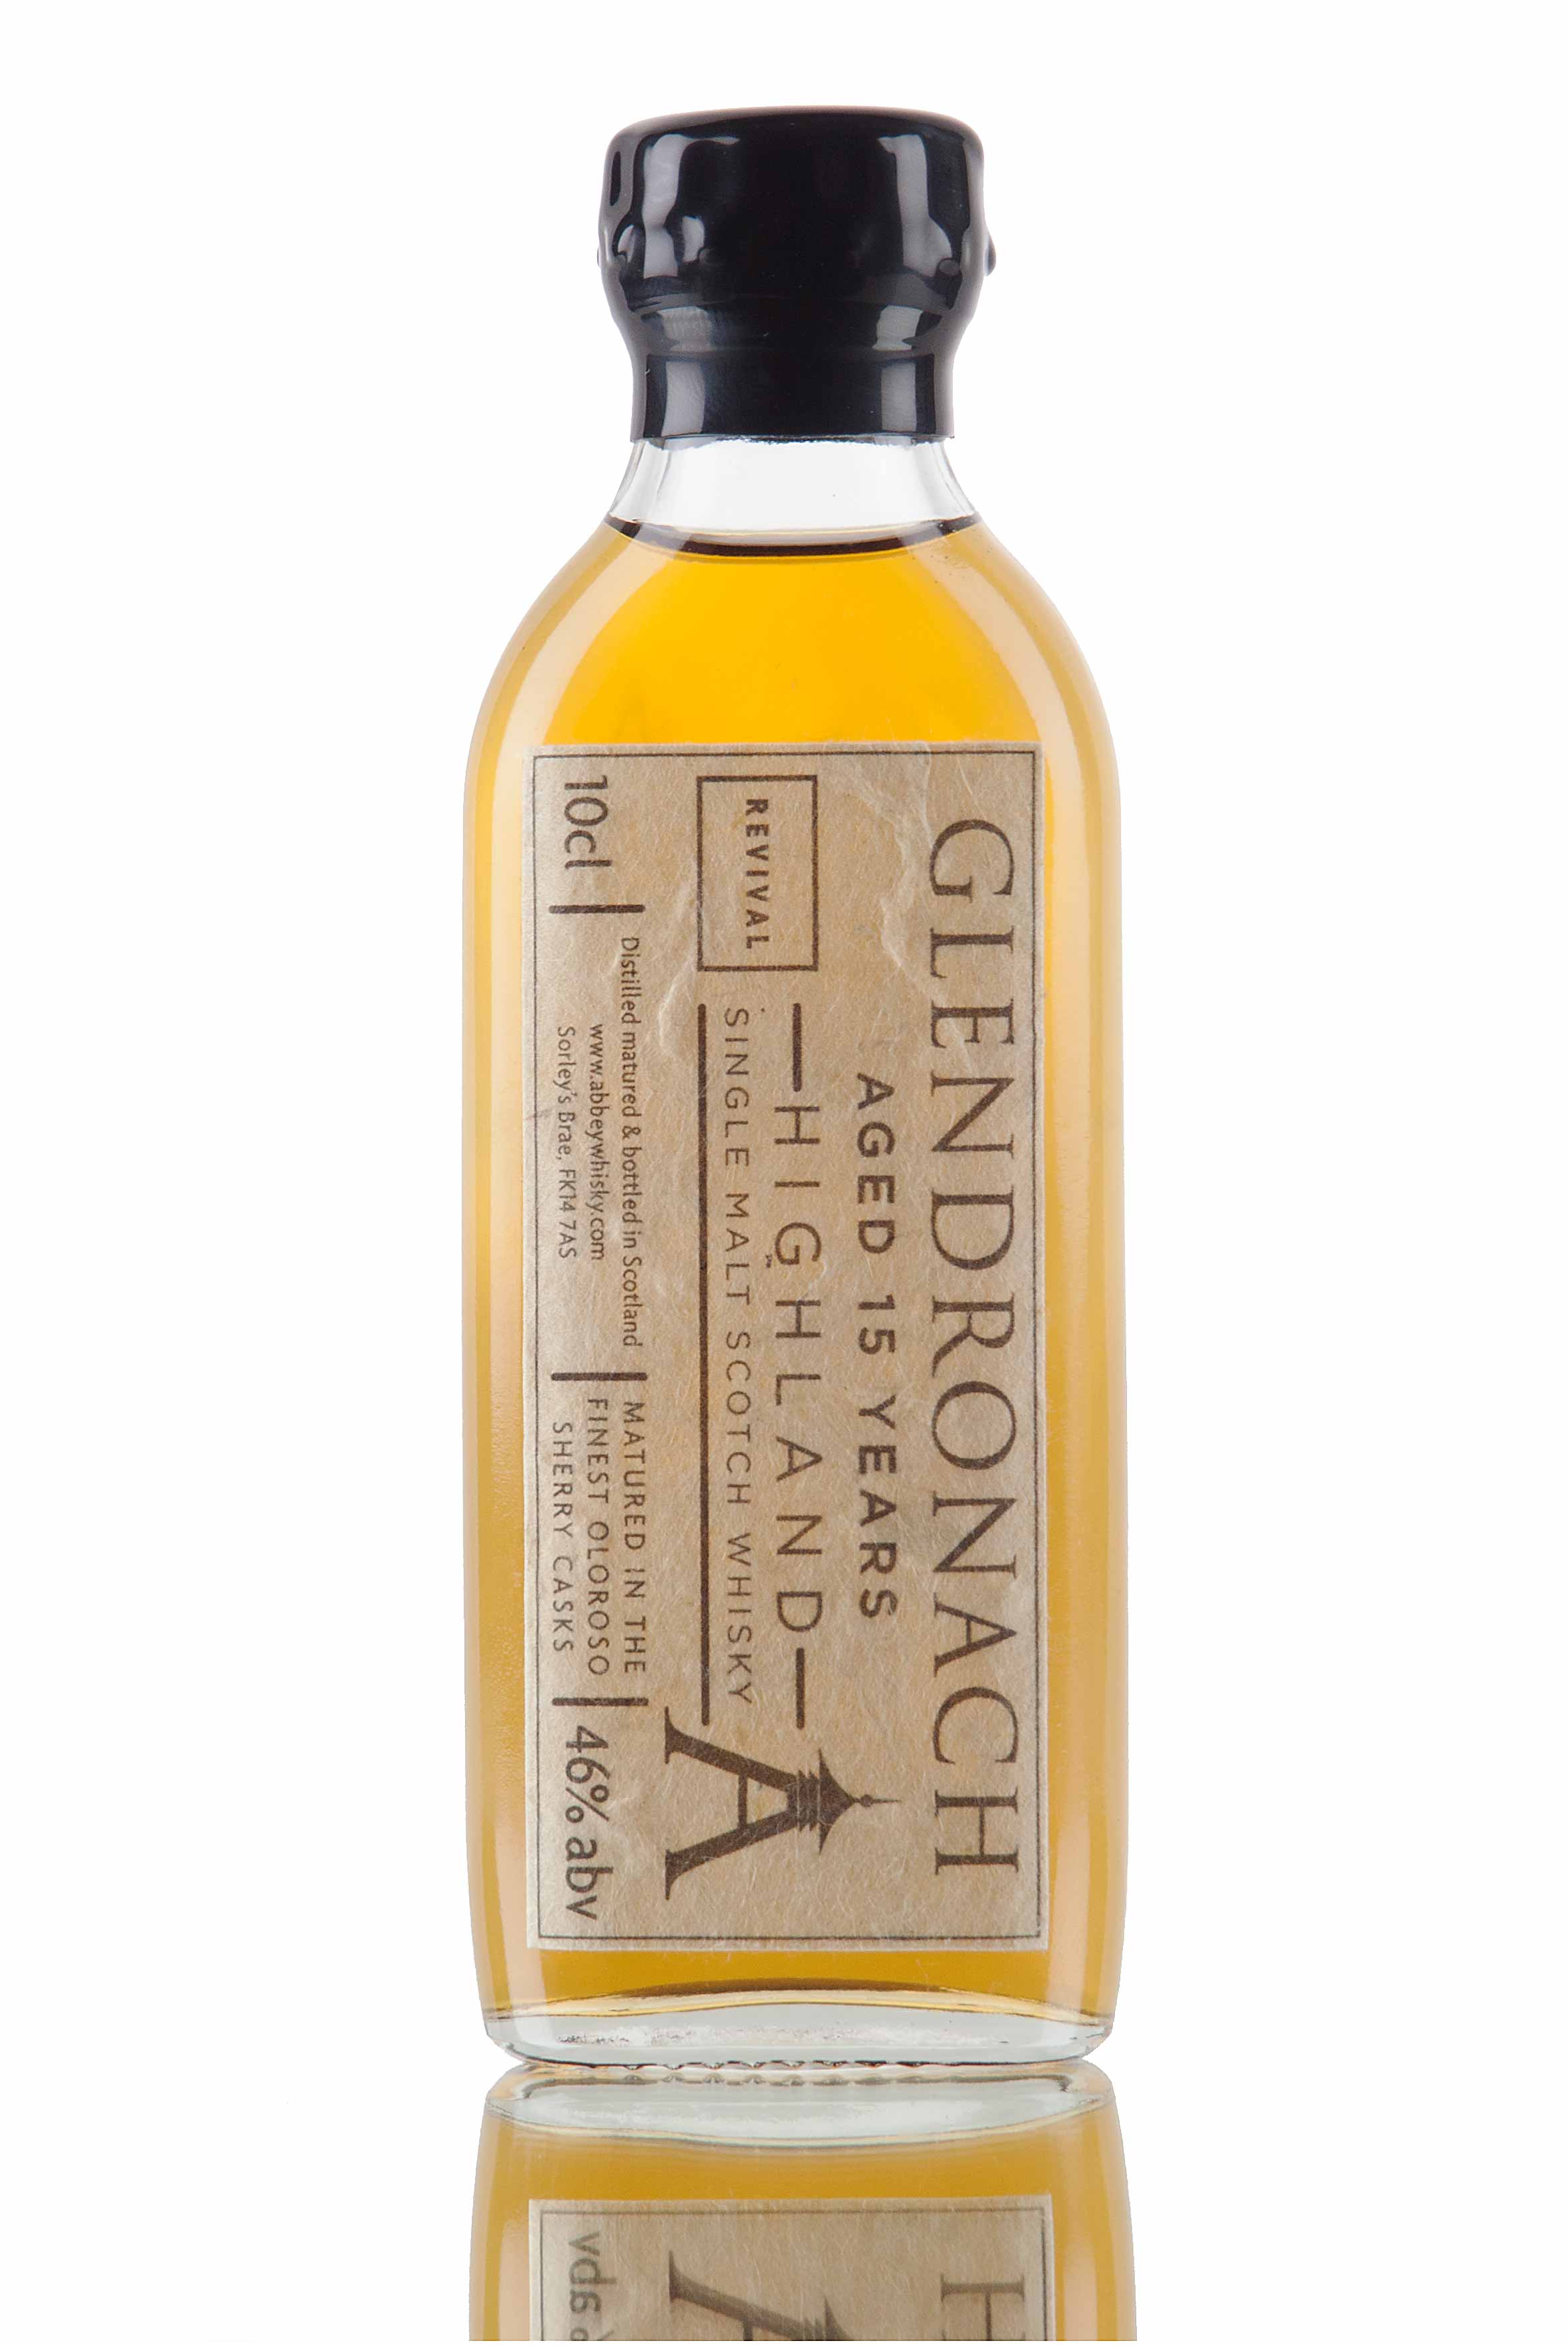 GlenDronach 15 Year Old - Revival / 10cl Sample